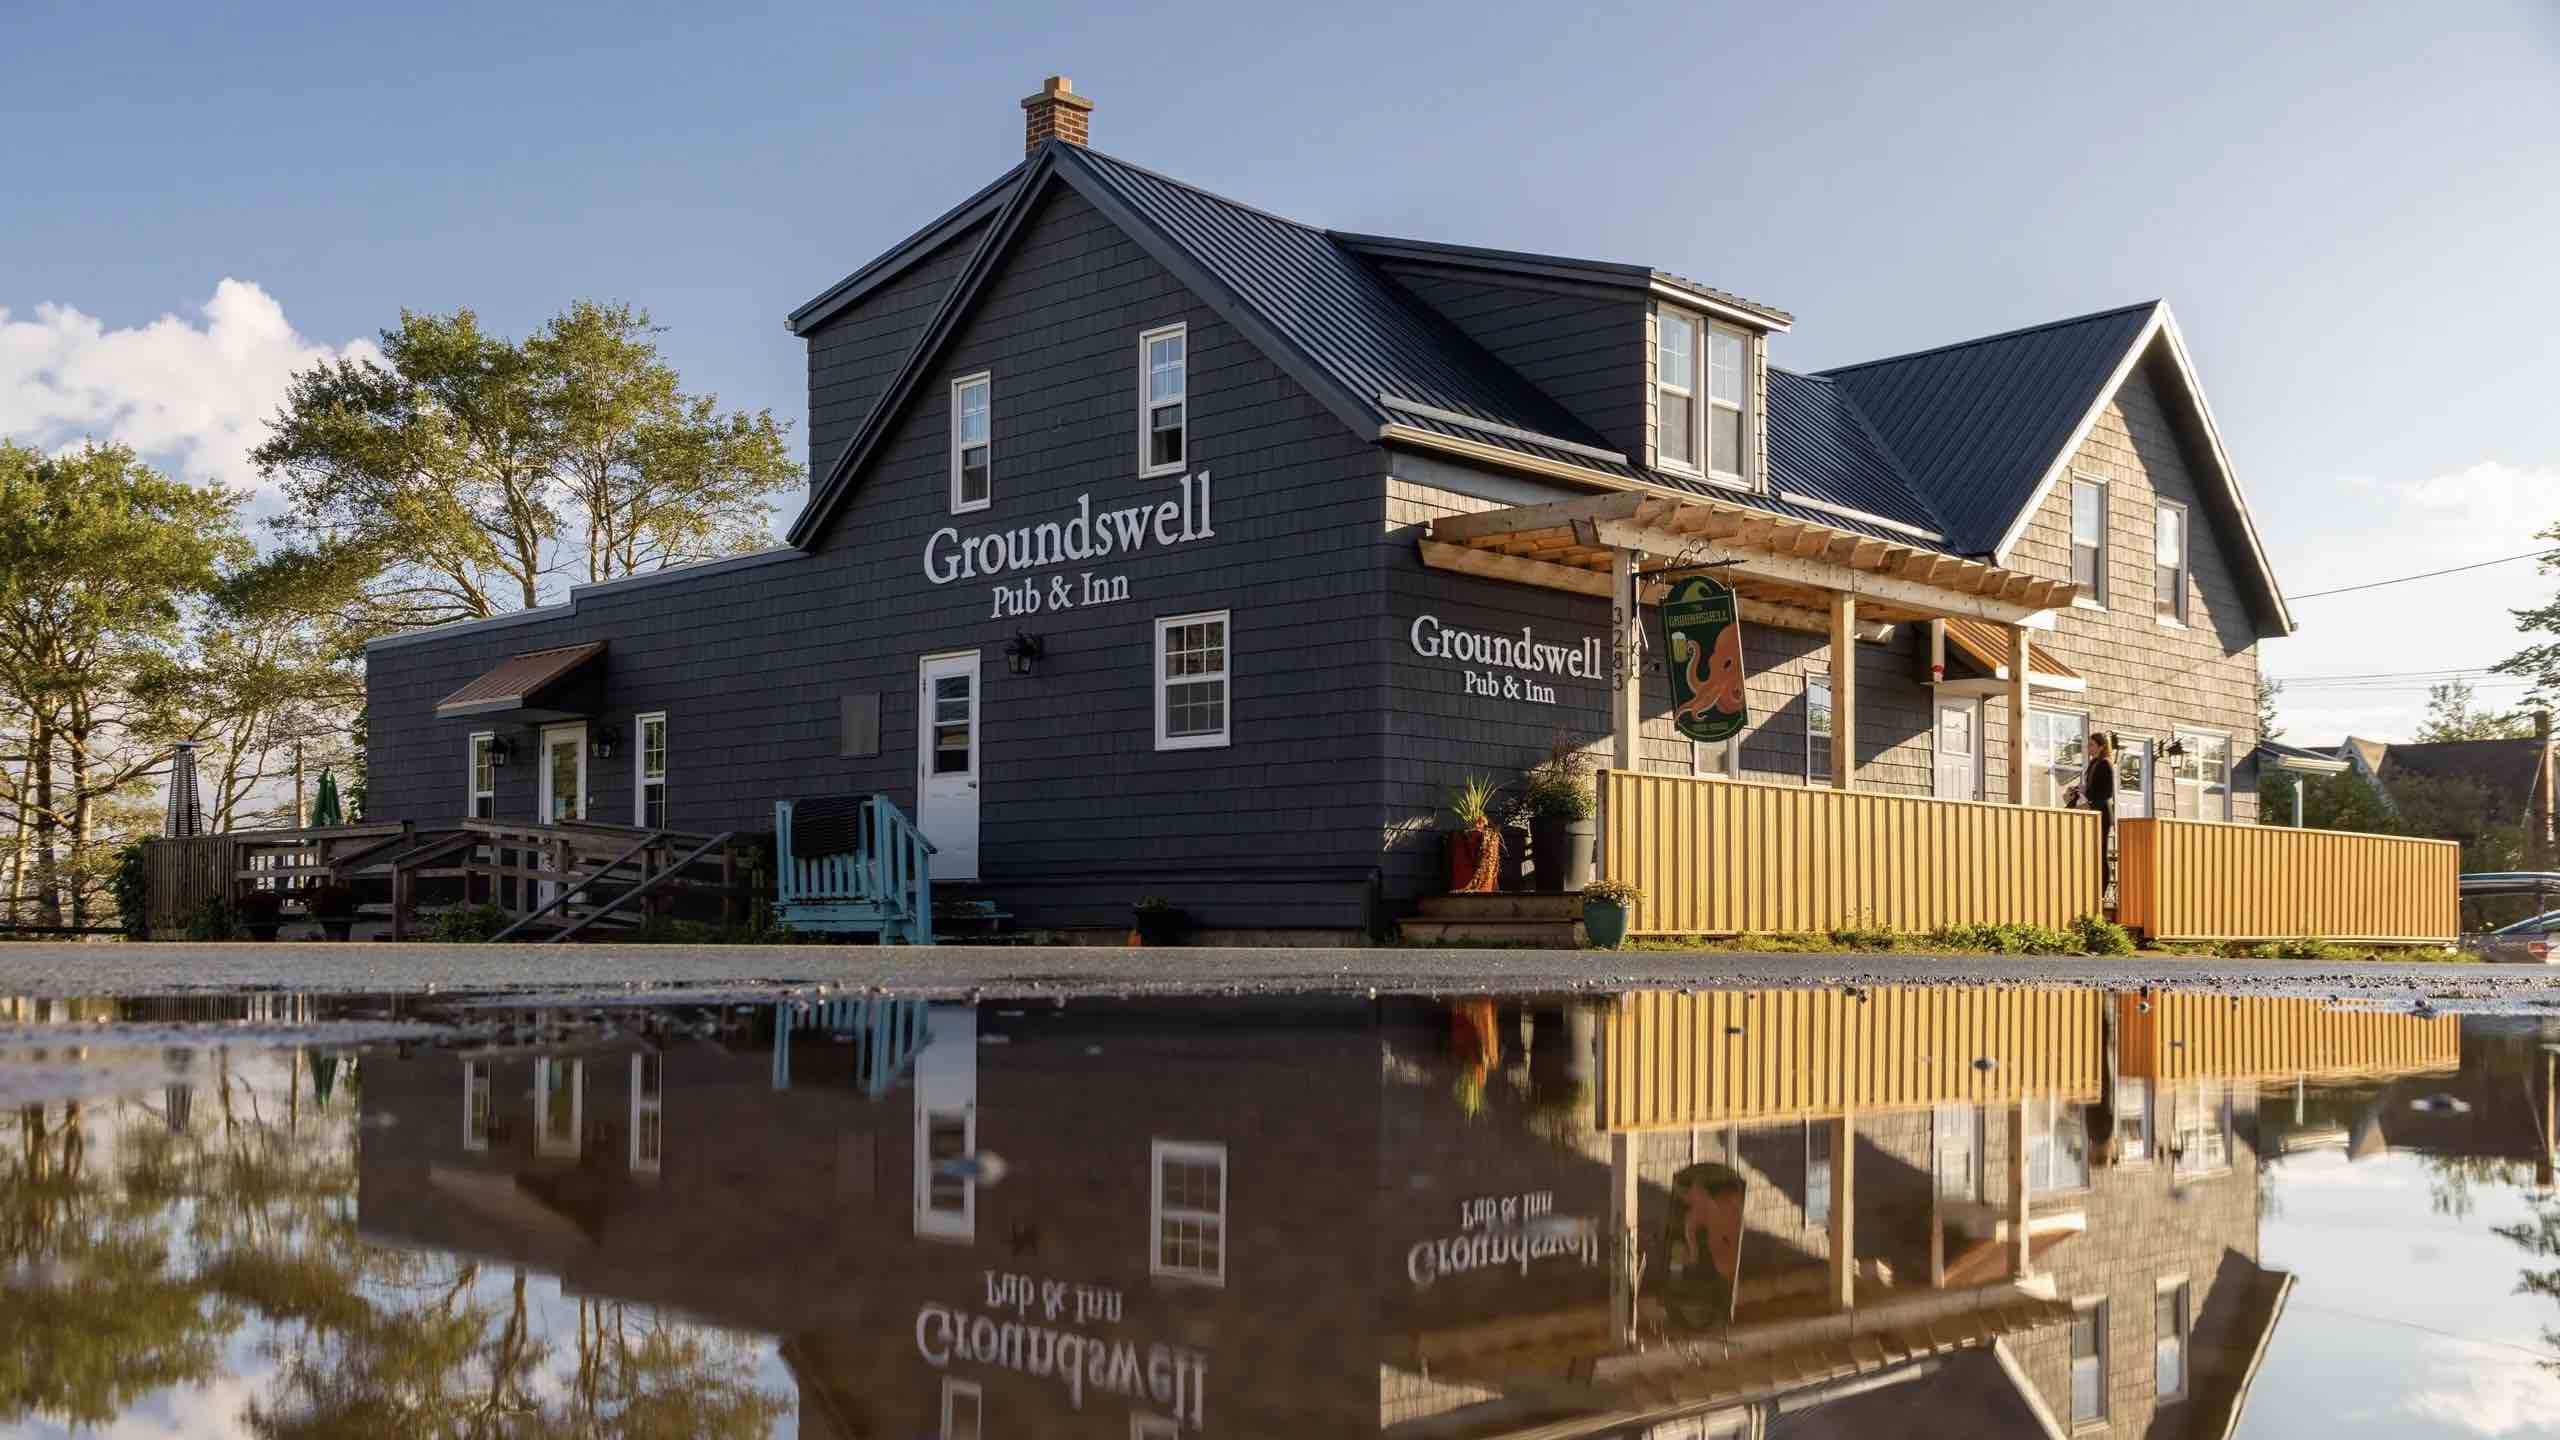 The Groundswell Inn & Pub, Cow Bay exterior reflected in pond